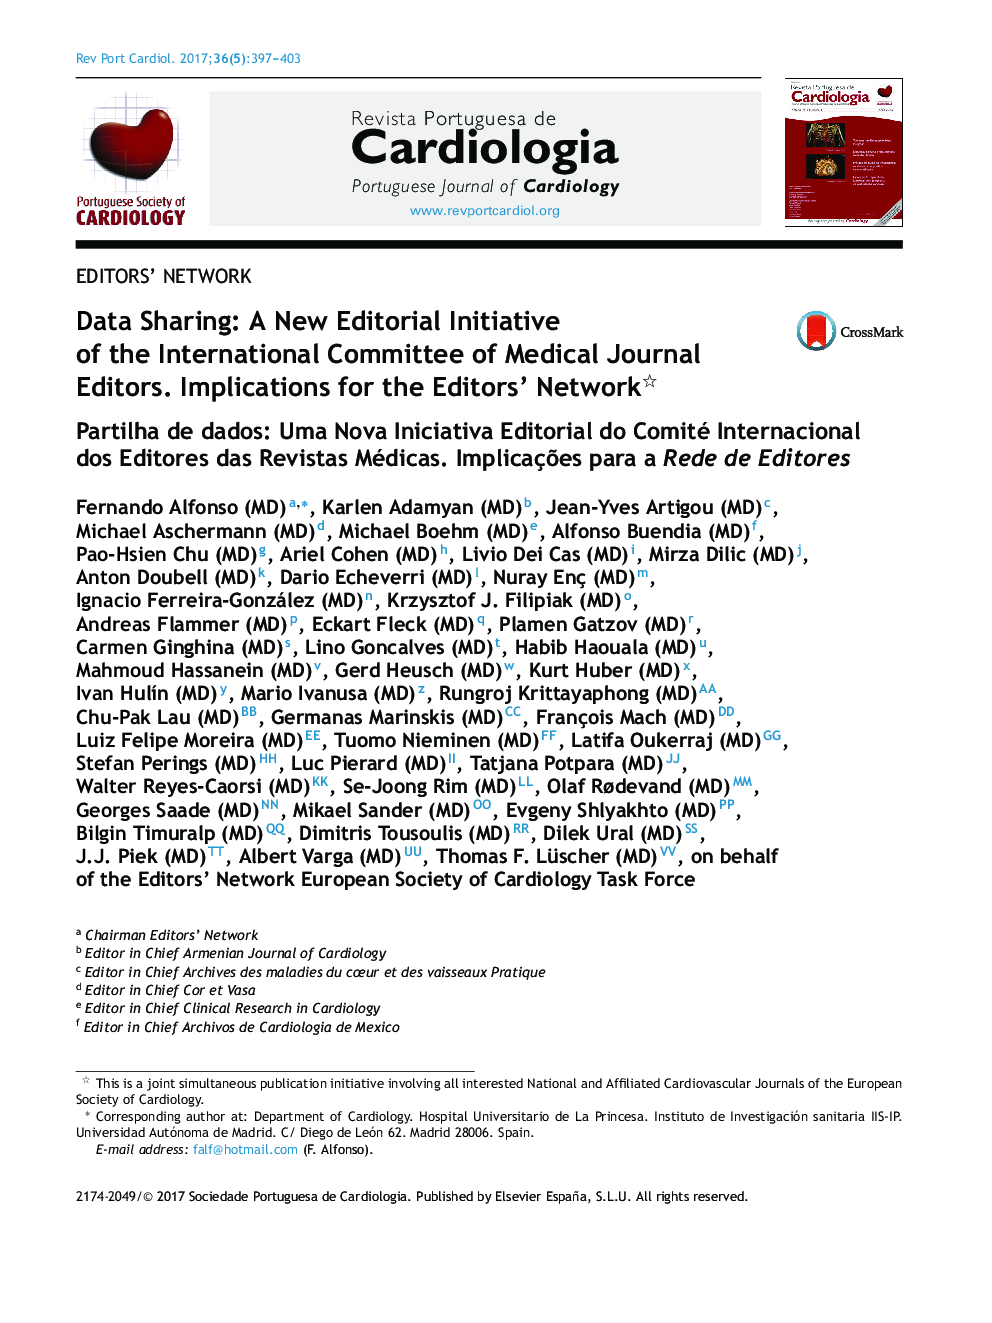 Data Sharing: A New Editorial Initiative of the International Committee of Medical Journal Editors. Implications for the Editors' Network